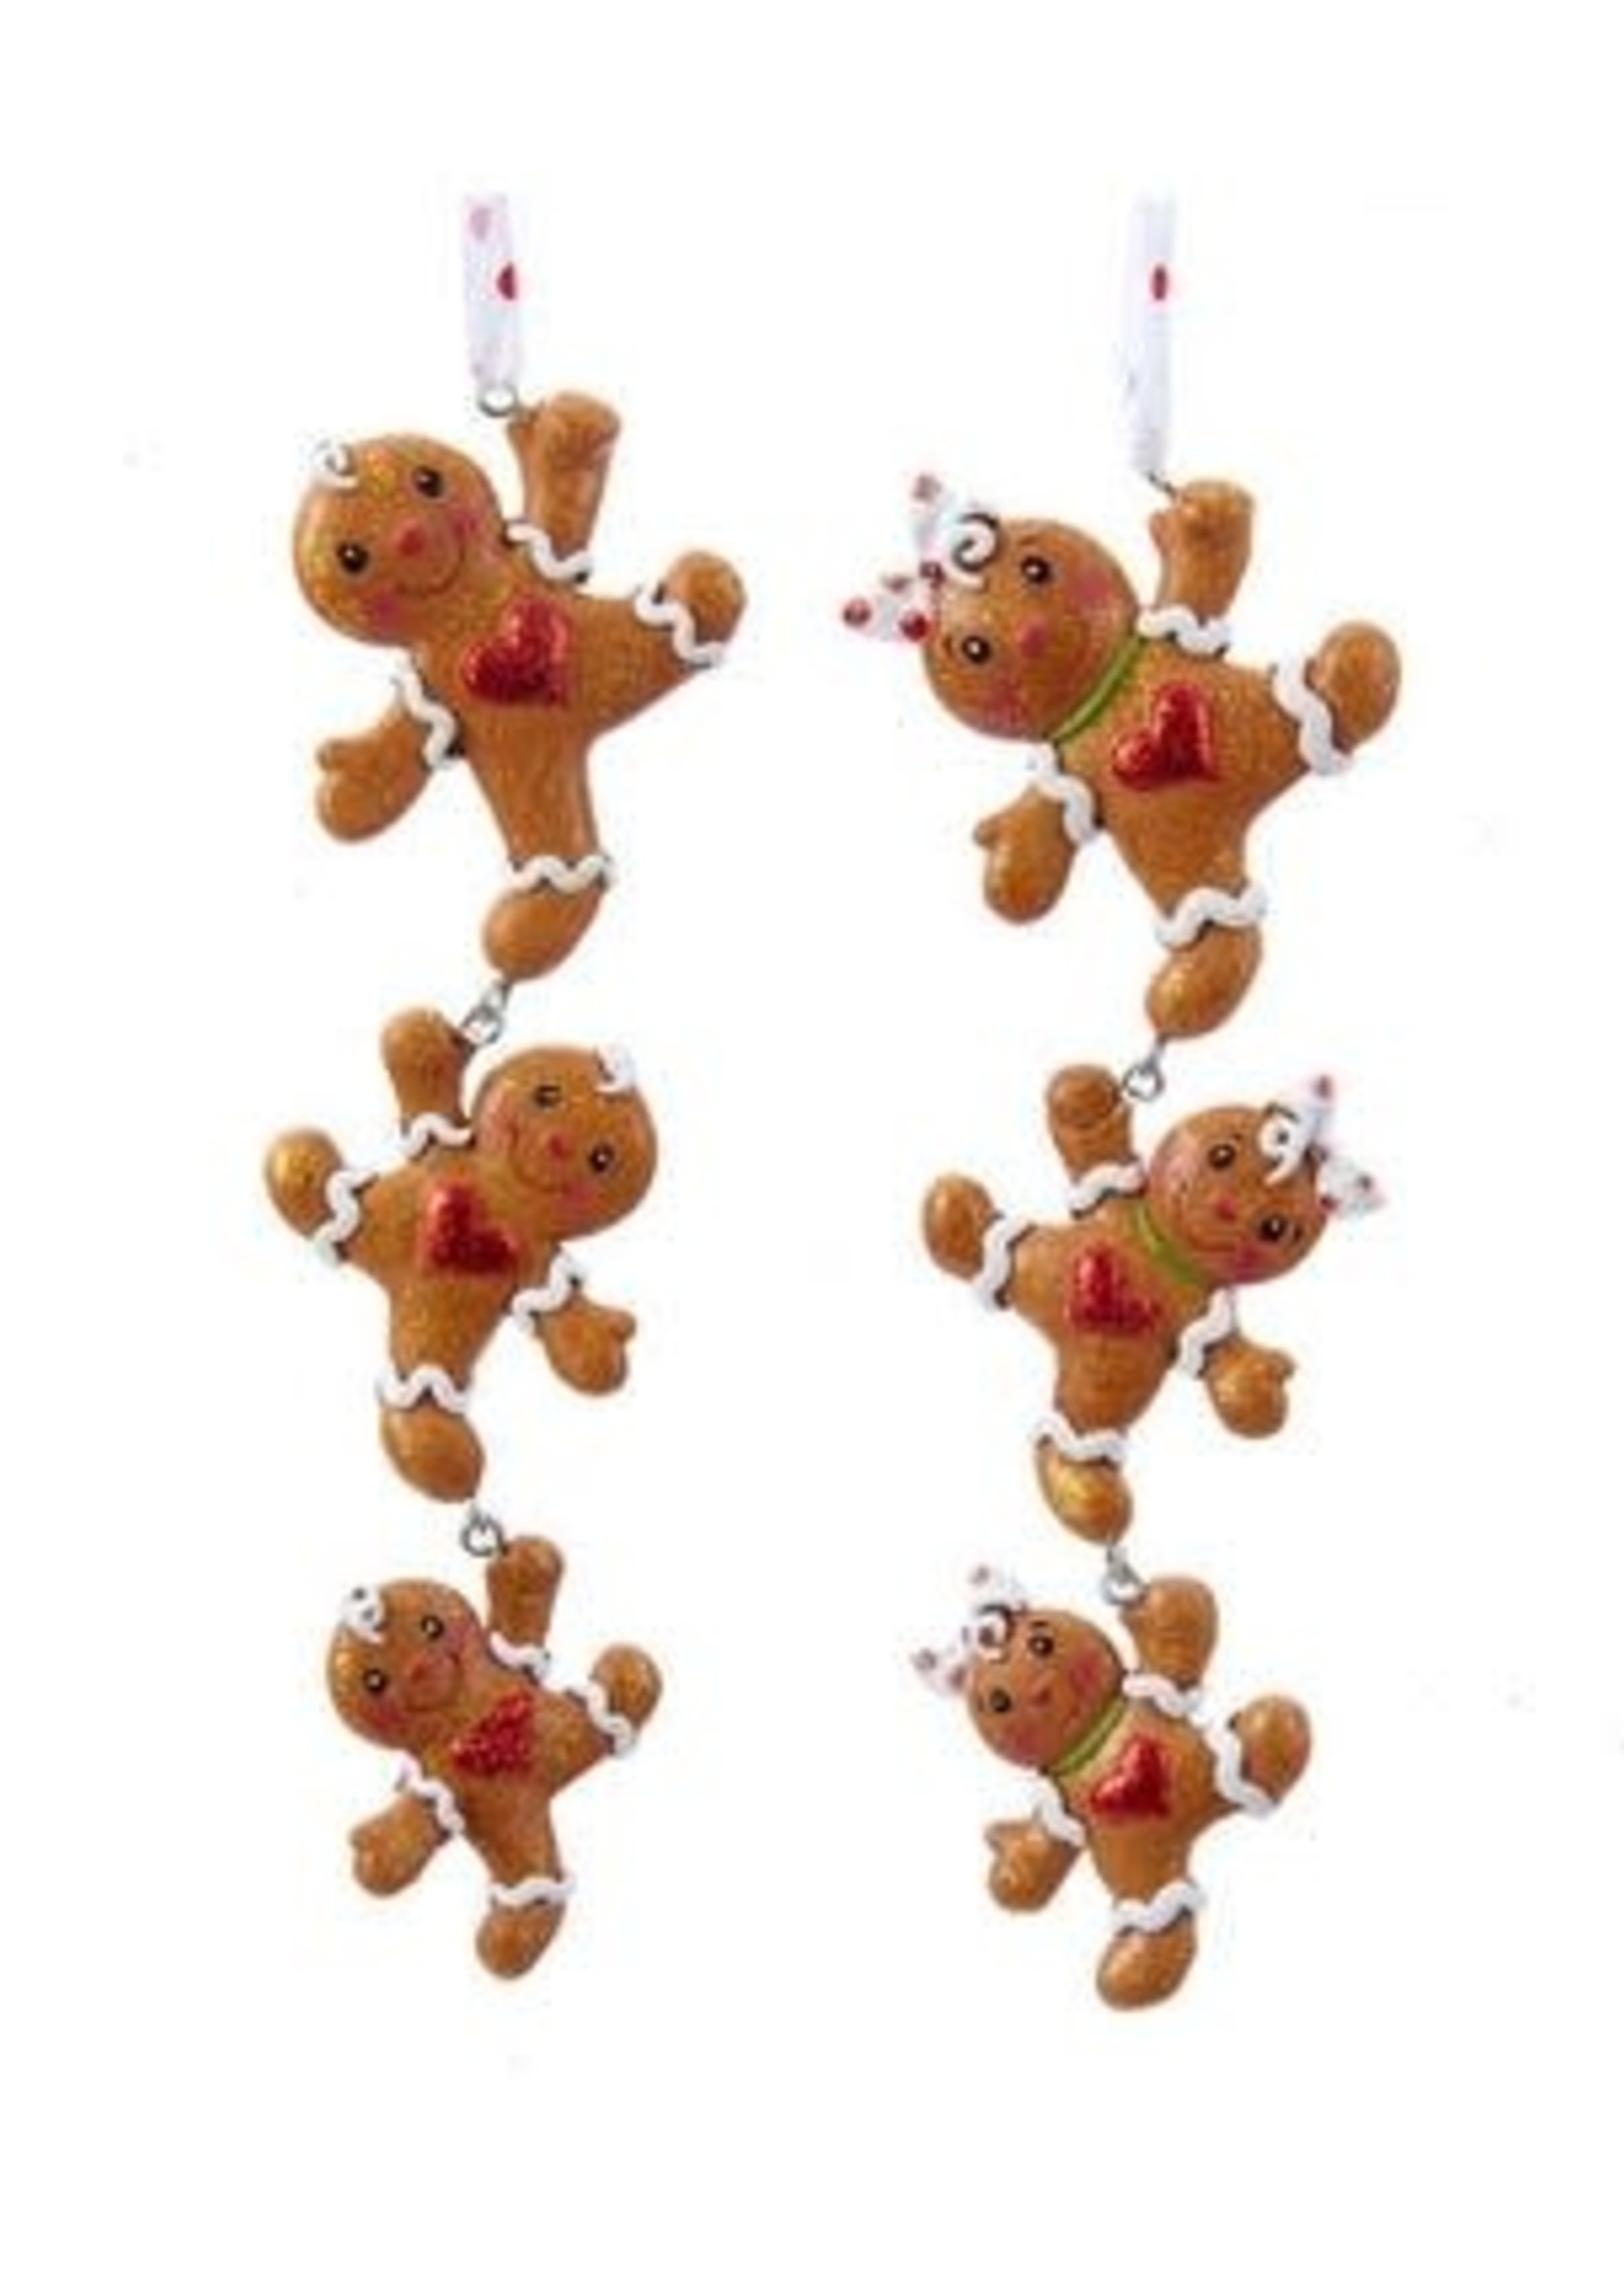 Design Decor Gingerbread Boy and Girl String Ornaments, 2 Assorted